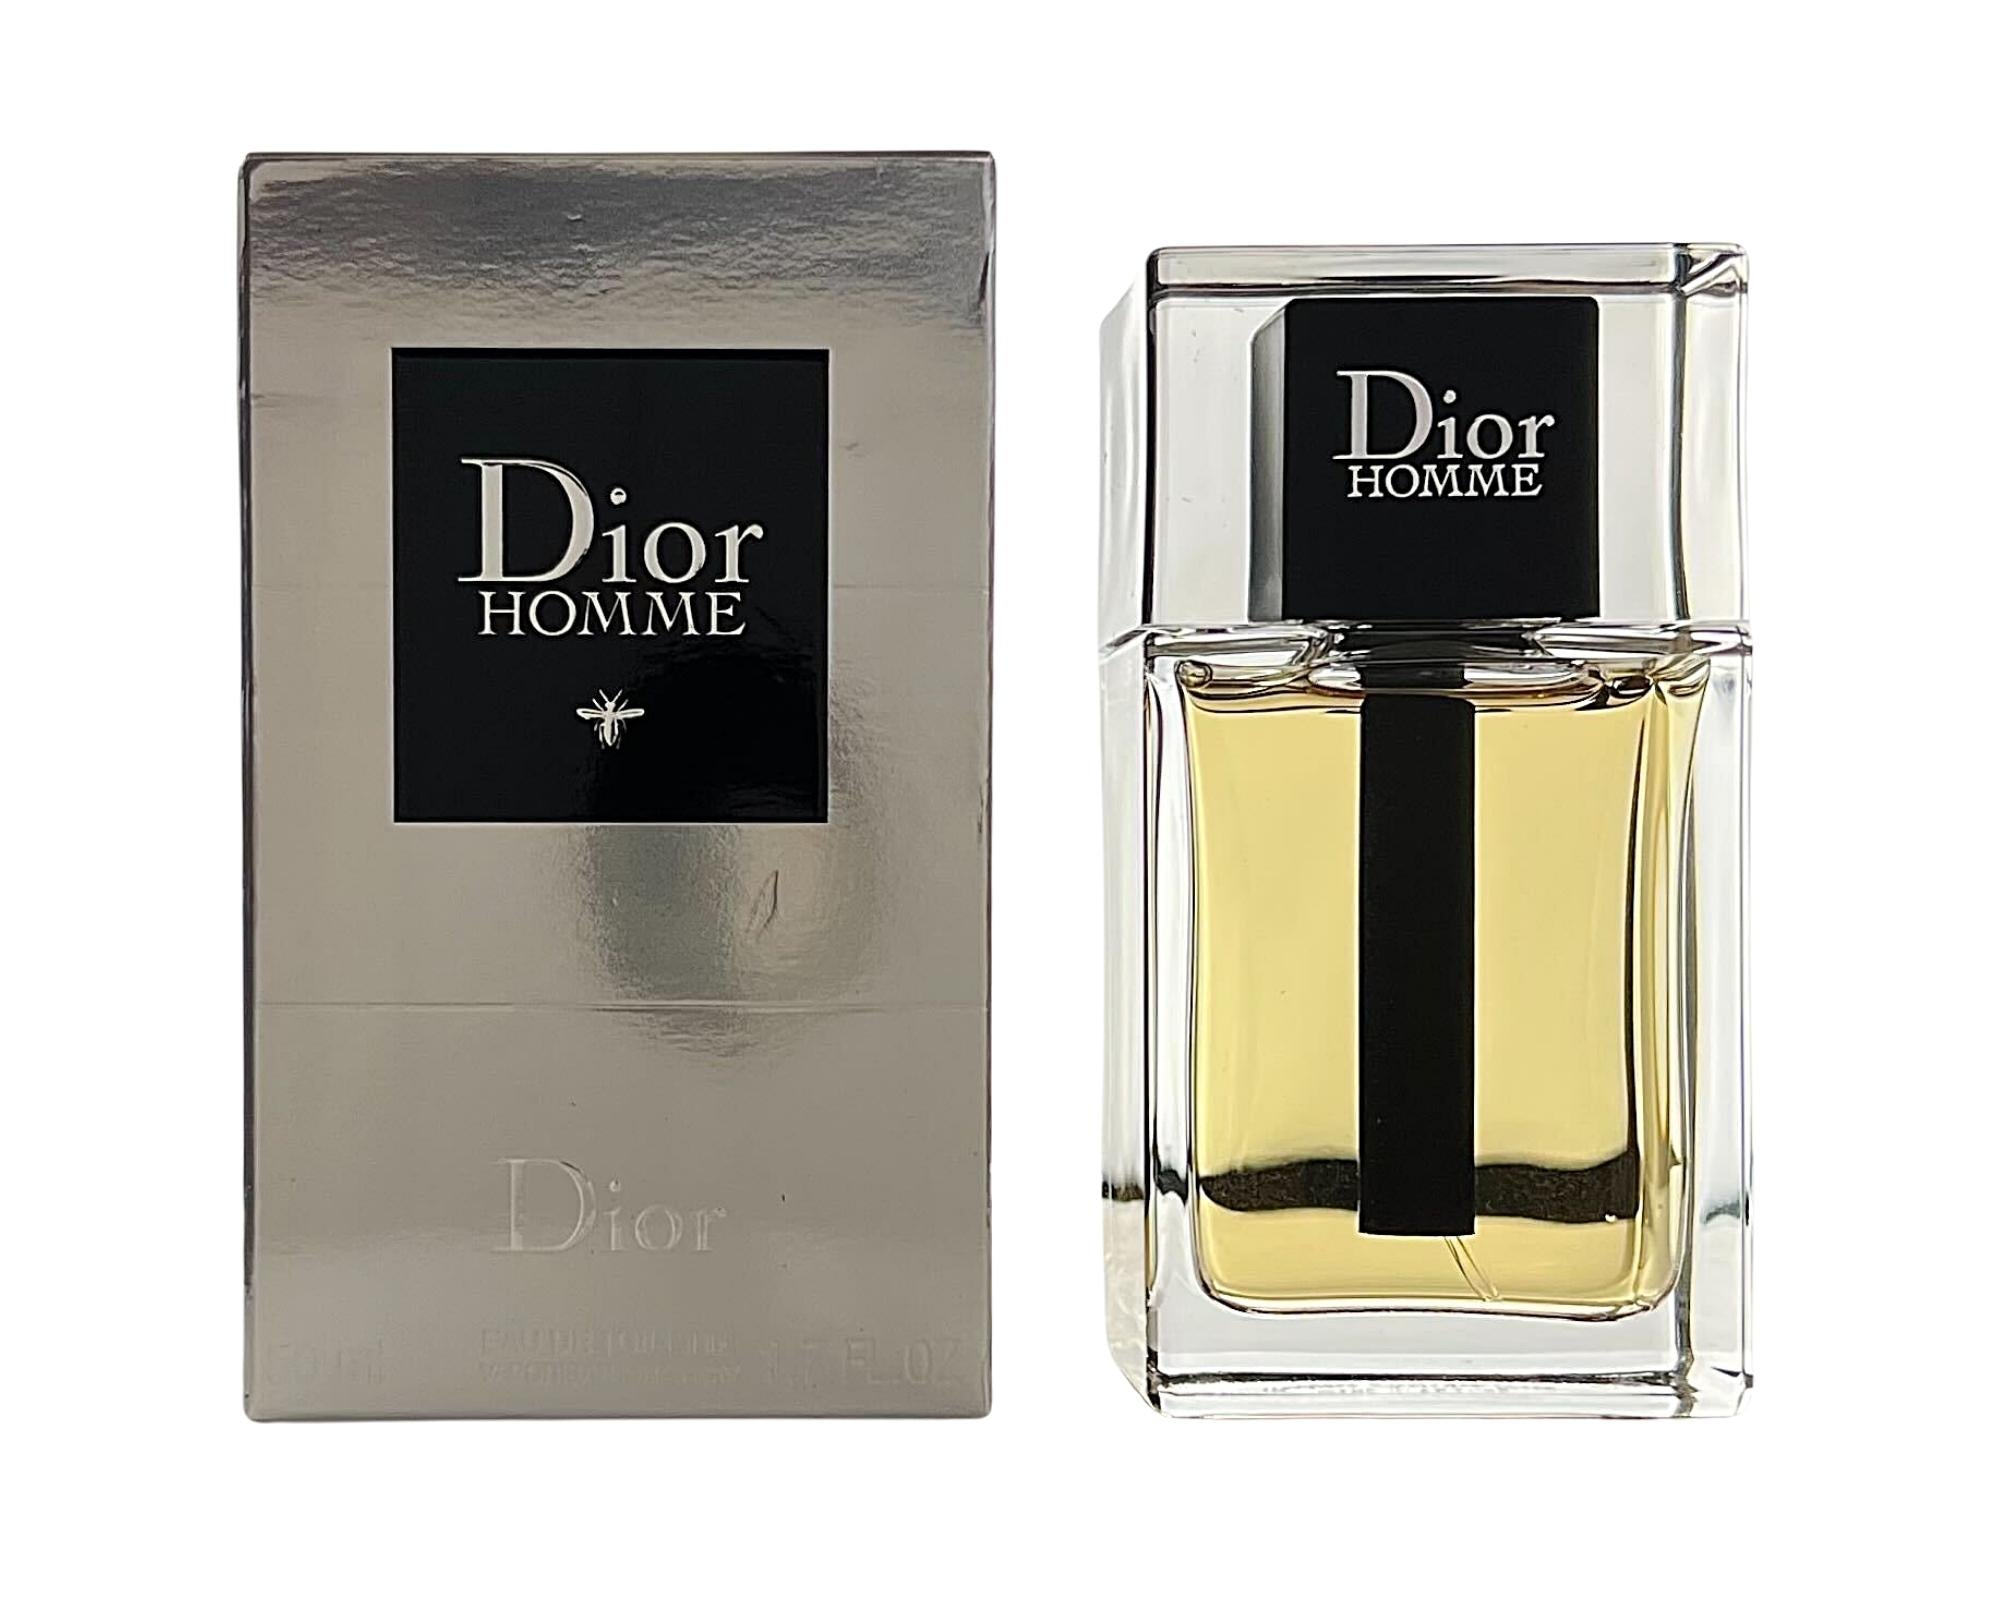 Christian Dior Hawaii Shopping Guide (Special Hawaii Pricing